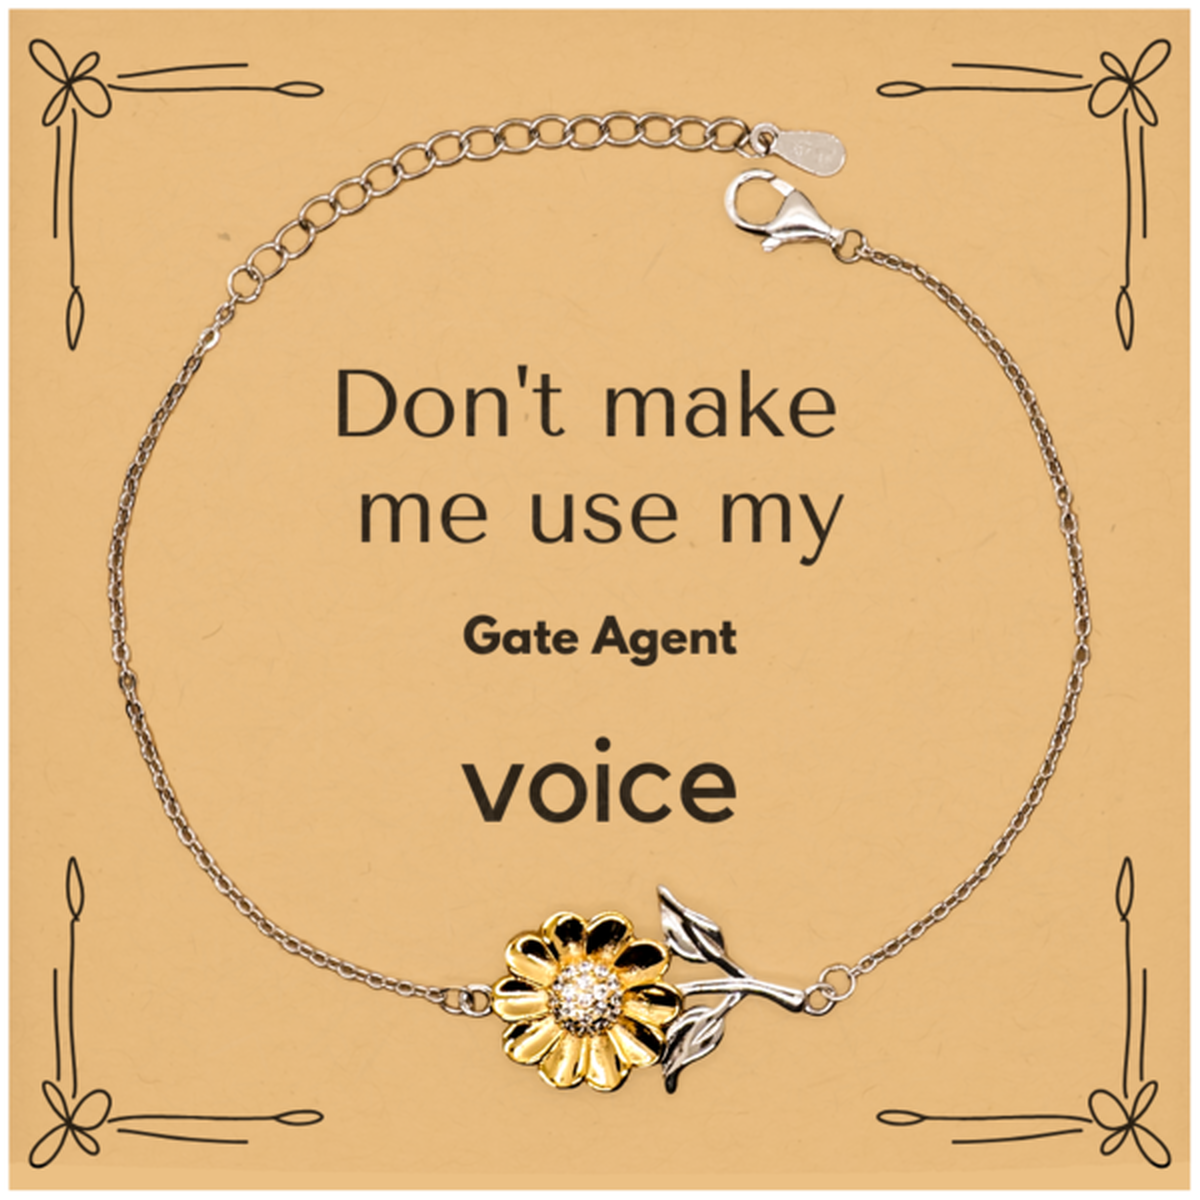 Don't make me use my Gate Agent voice, Sarcasm Gate Agent Card Gifts, Christmas Gate Agent Sunflower Bracelet Birthday Unique Gifts For Gate Agent Coworkers, Men, Women, Colleague, Friends